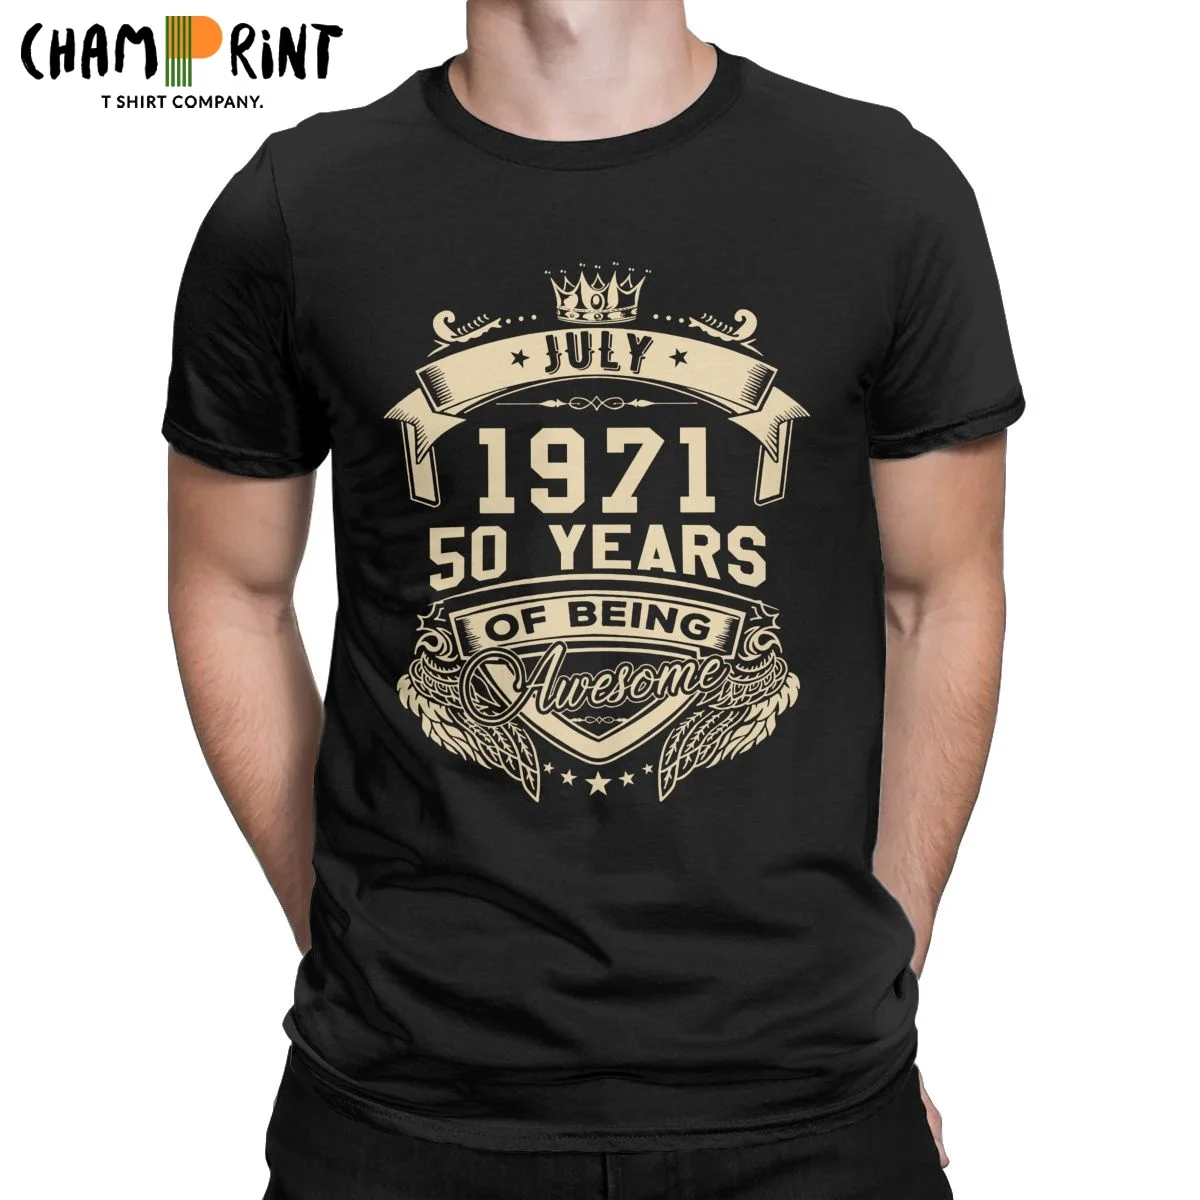 

Men's T-Shirts Born In July 1971 50 Years Of Being Awesome Limited Fun Cotton Tee Shirt Crew Neck T-Shirt Clothes Gift Idea